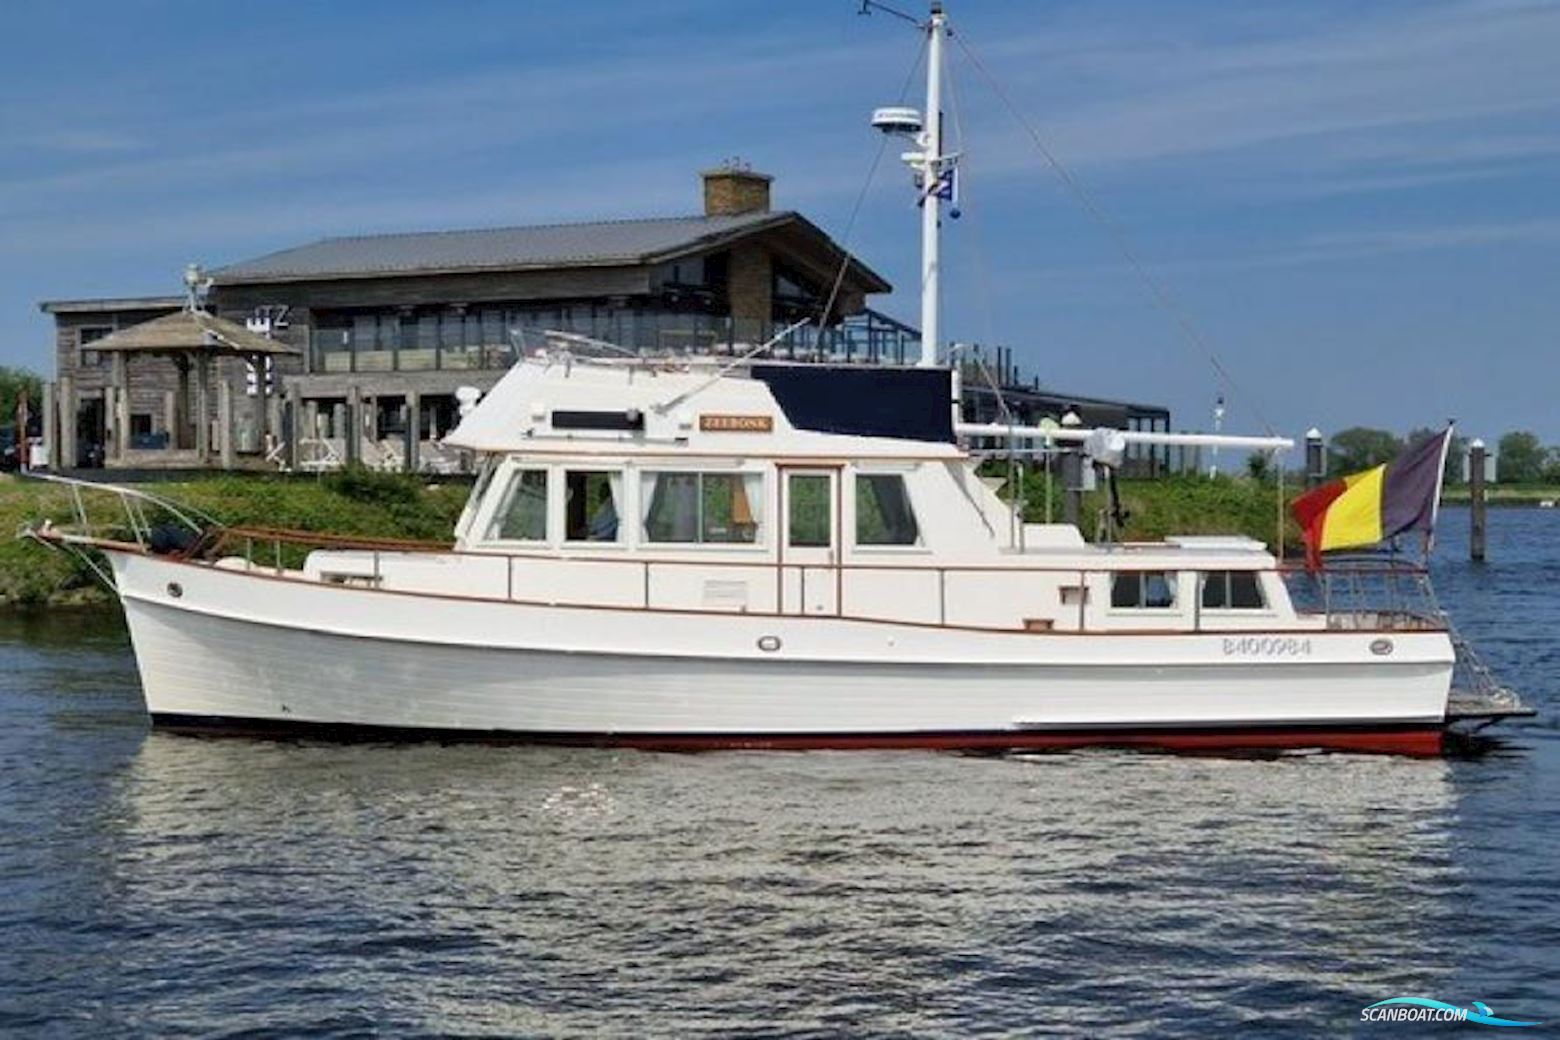 Grand Banks 36 Classic Motor boat 1990, with Ford Lehman 135 pk.(2725E) engine, The Netherlands